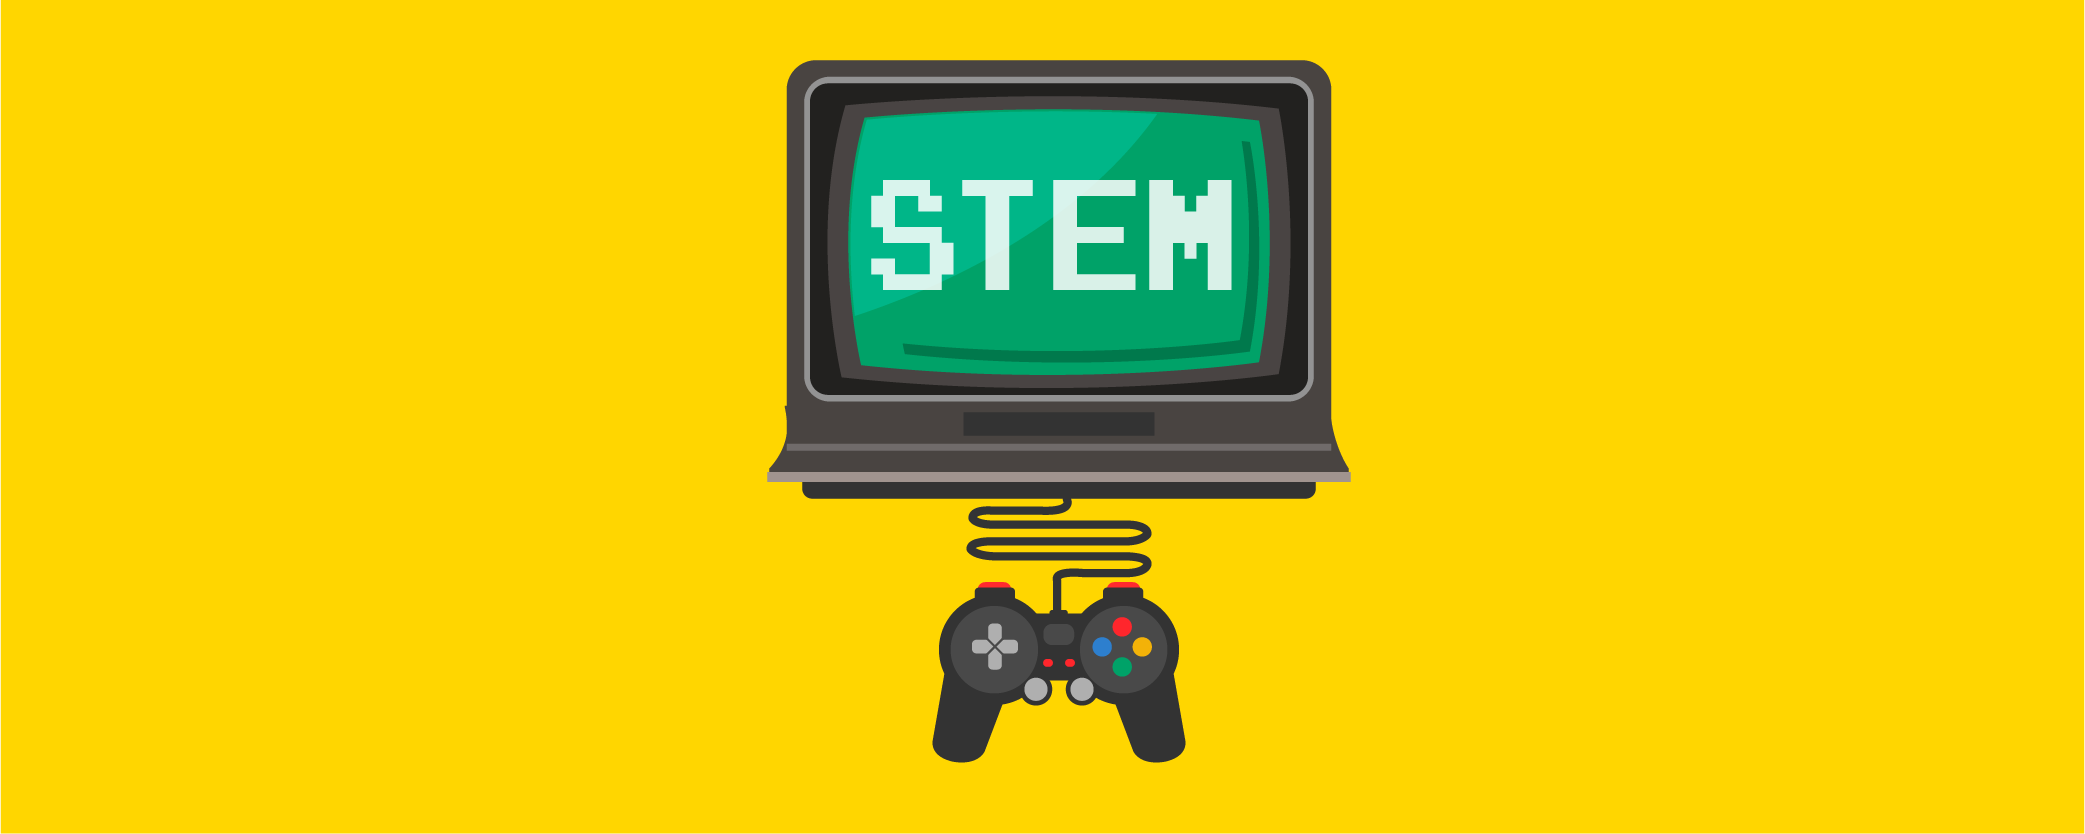 Game-Based Learning vs. Gamification: How To Use Both In The Classroom